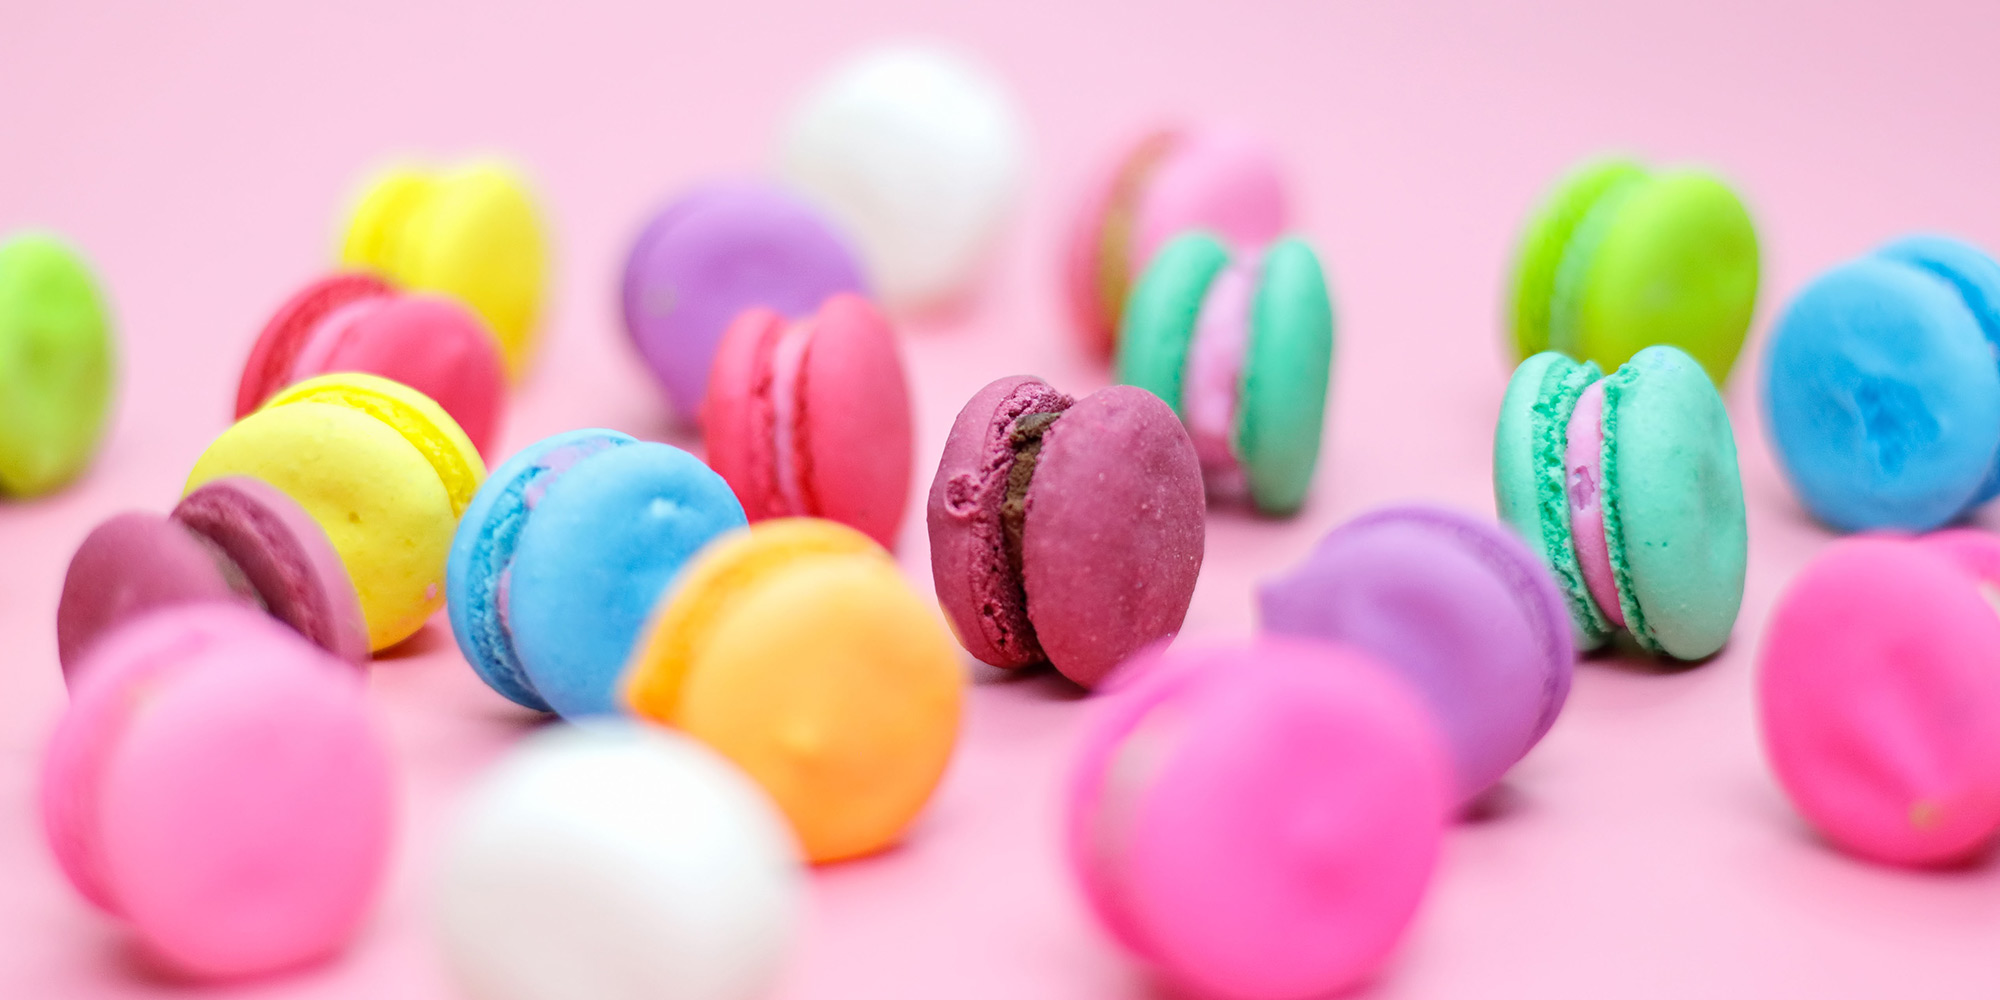 pink, blue, green, yellow, and purple macaron cookies against pink background